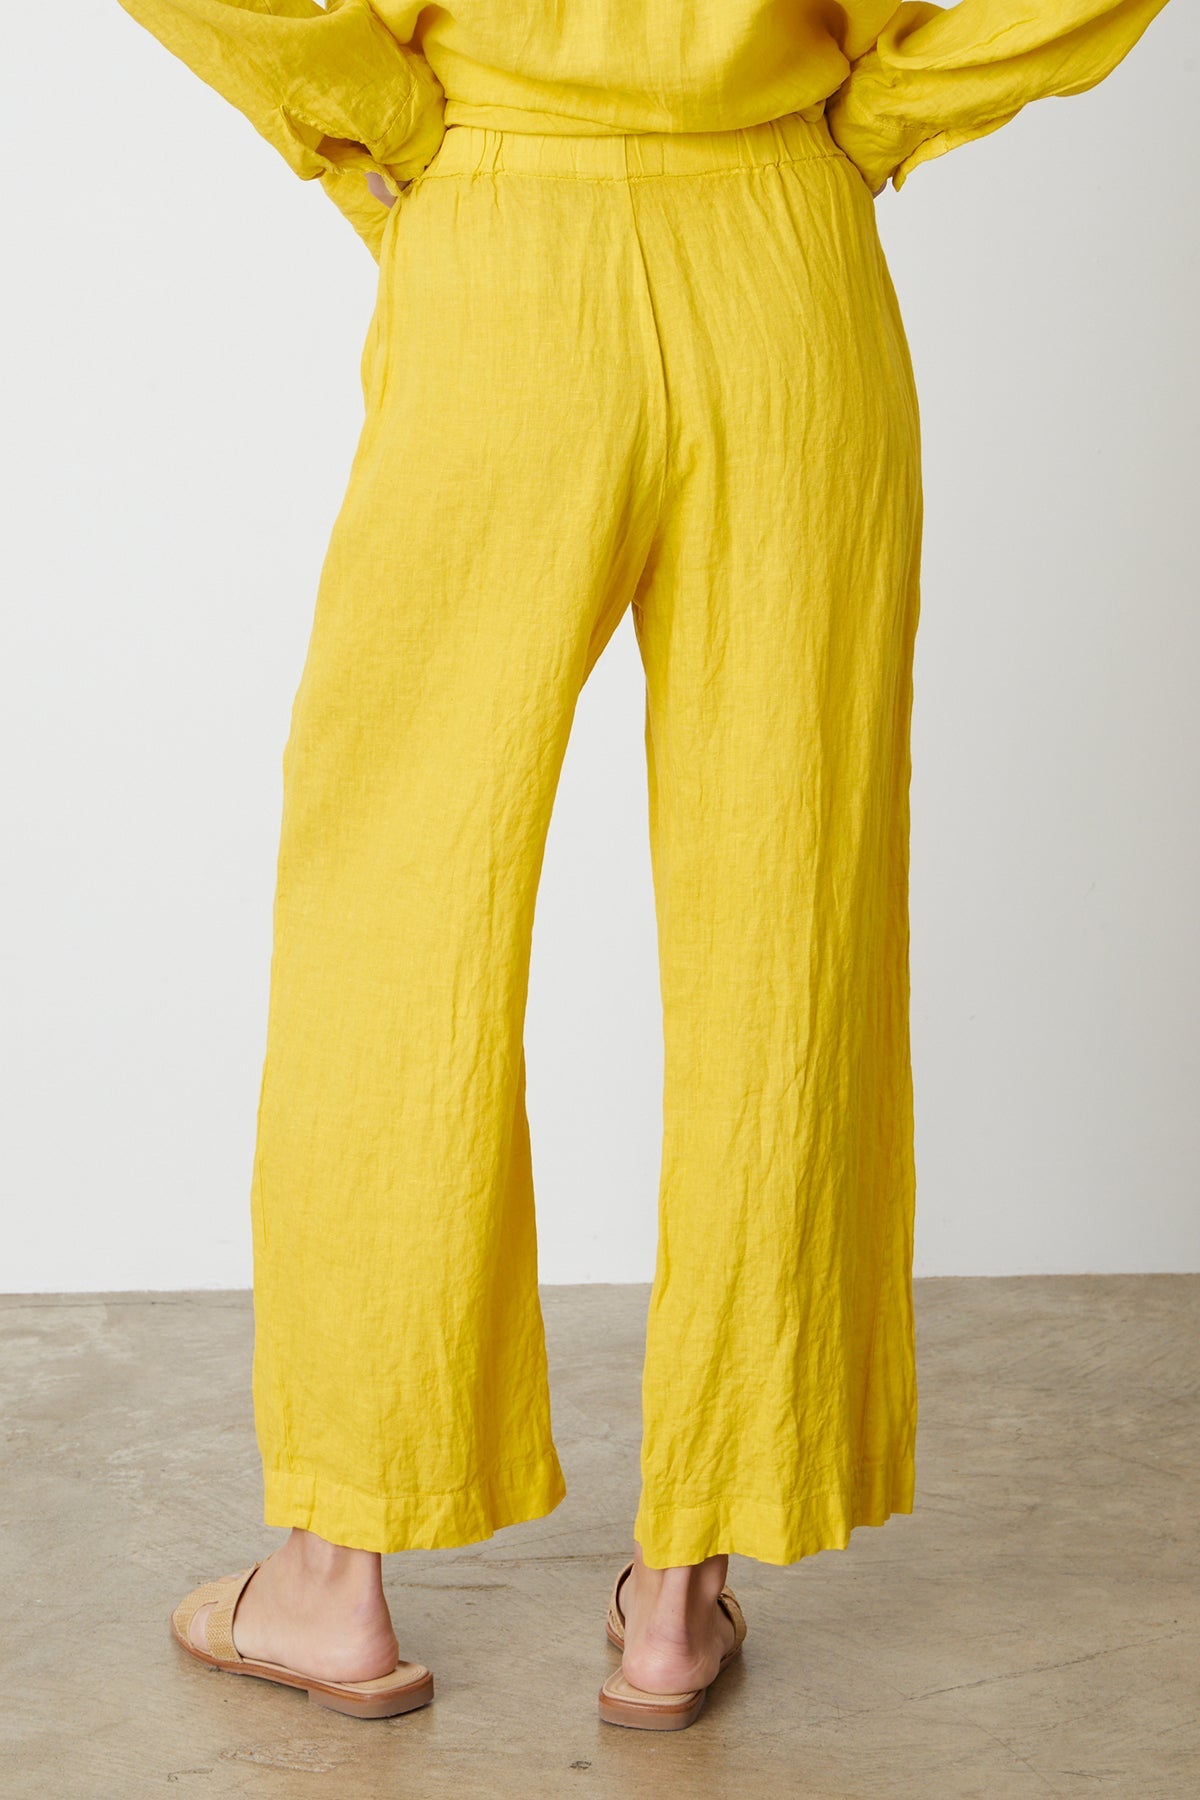 Lola pant in bright yellow sun colored linen back-35206342213825